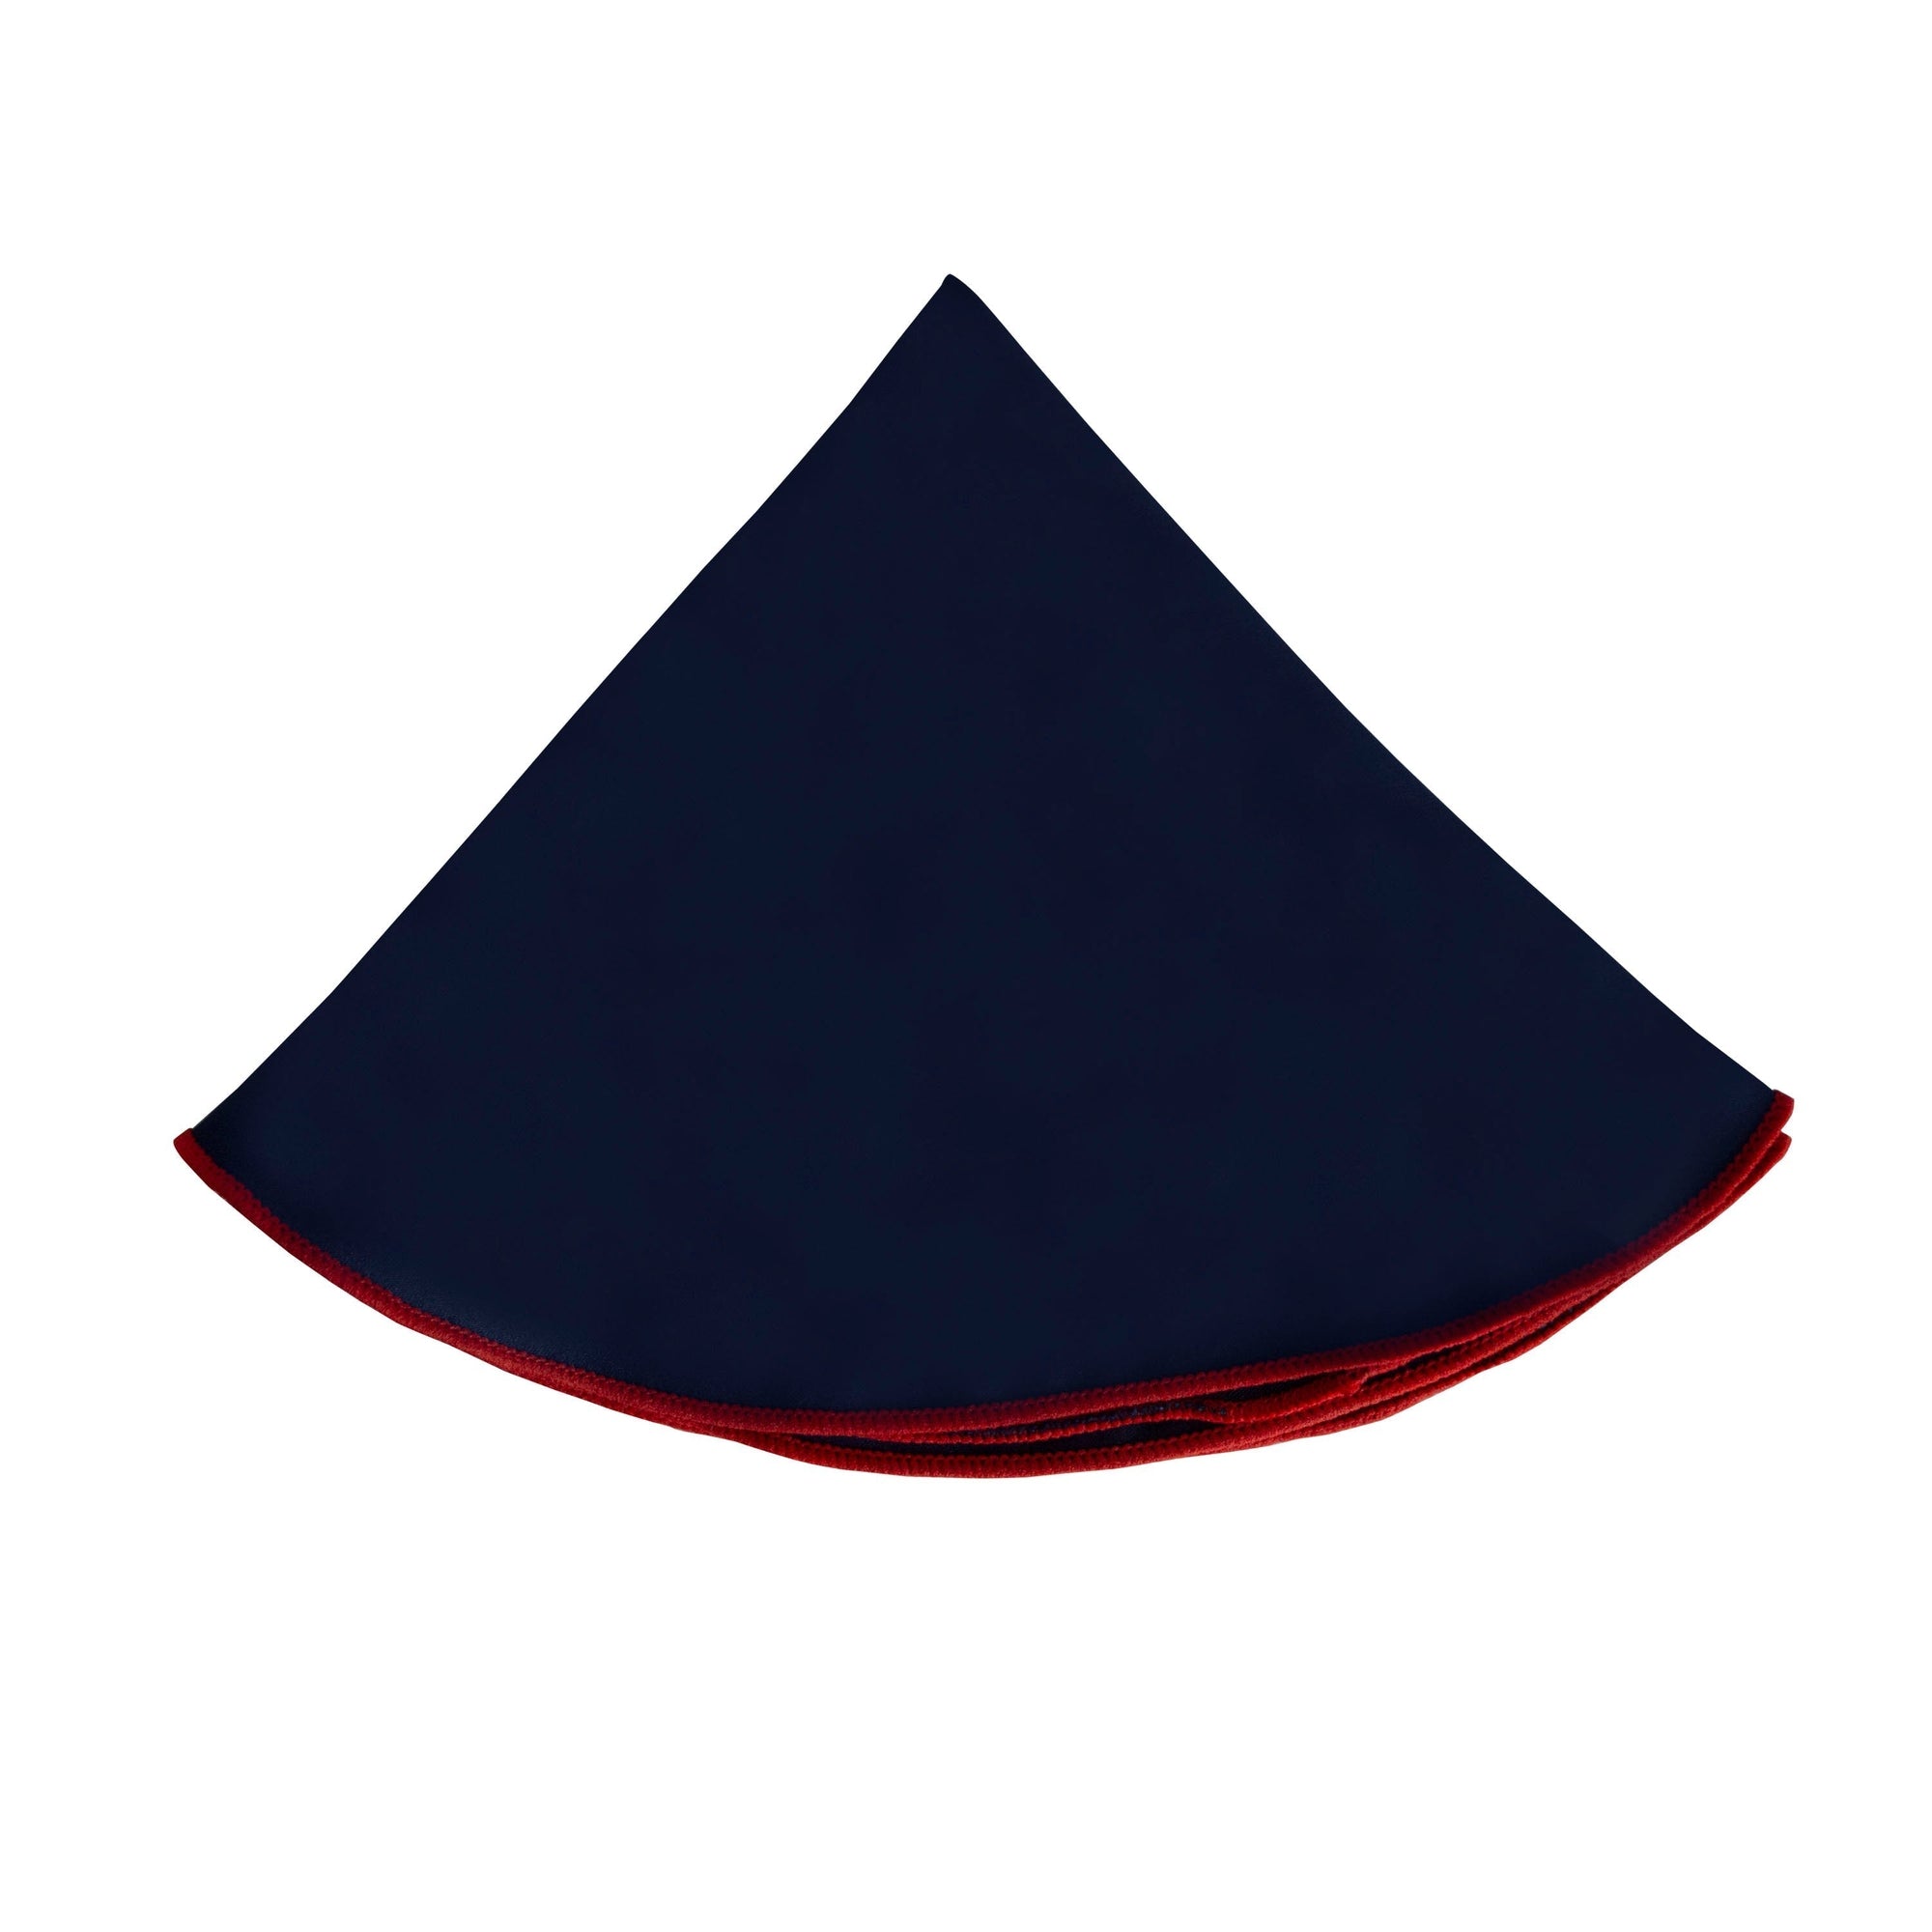 Round Pocket Square in Navy with Red Edges-Pocket Squares-MarZthomson-Cufflinks.com.sg